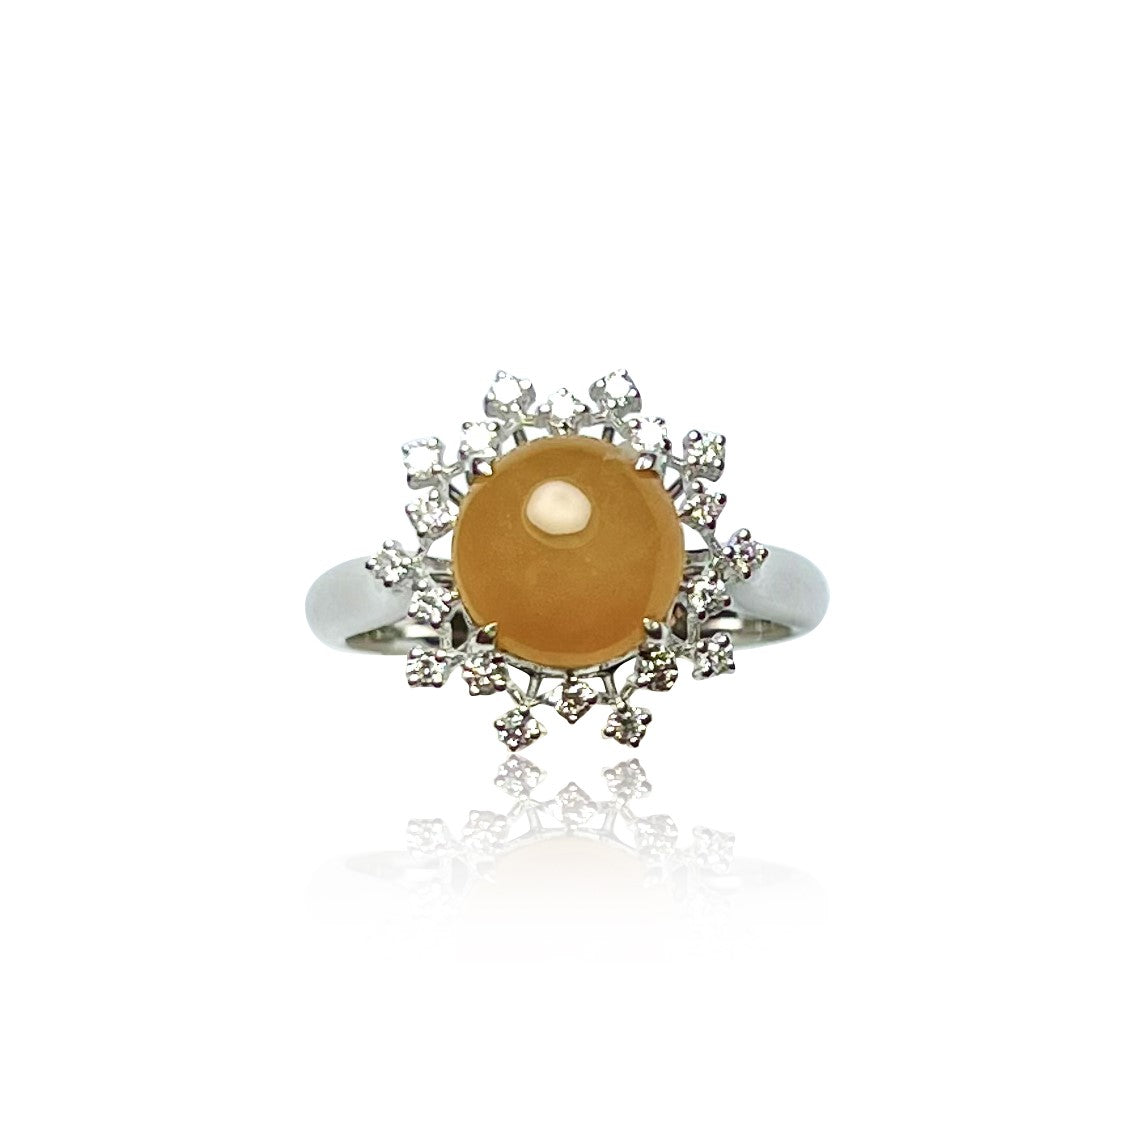 YELLOW JADEITE CABOCHON RING IN 18K WHITE GOLD AND DIAMONDS